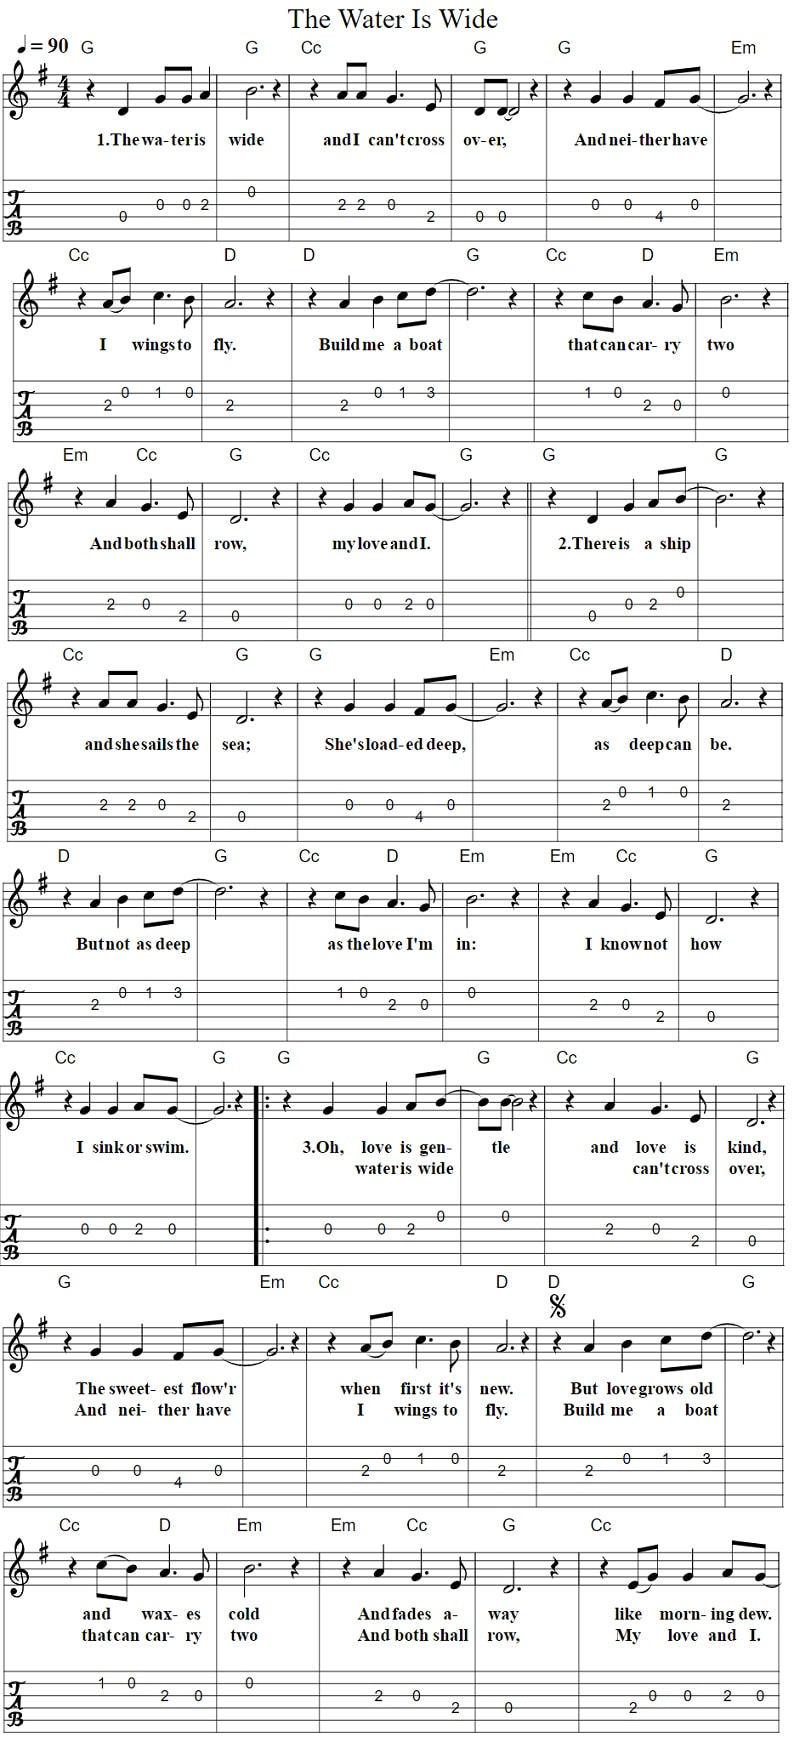 The water is wide guitar tab and chords